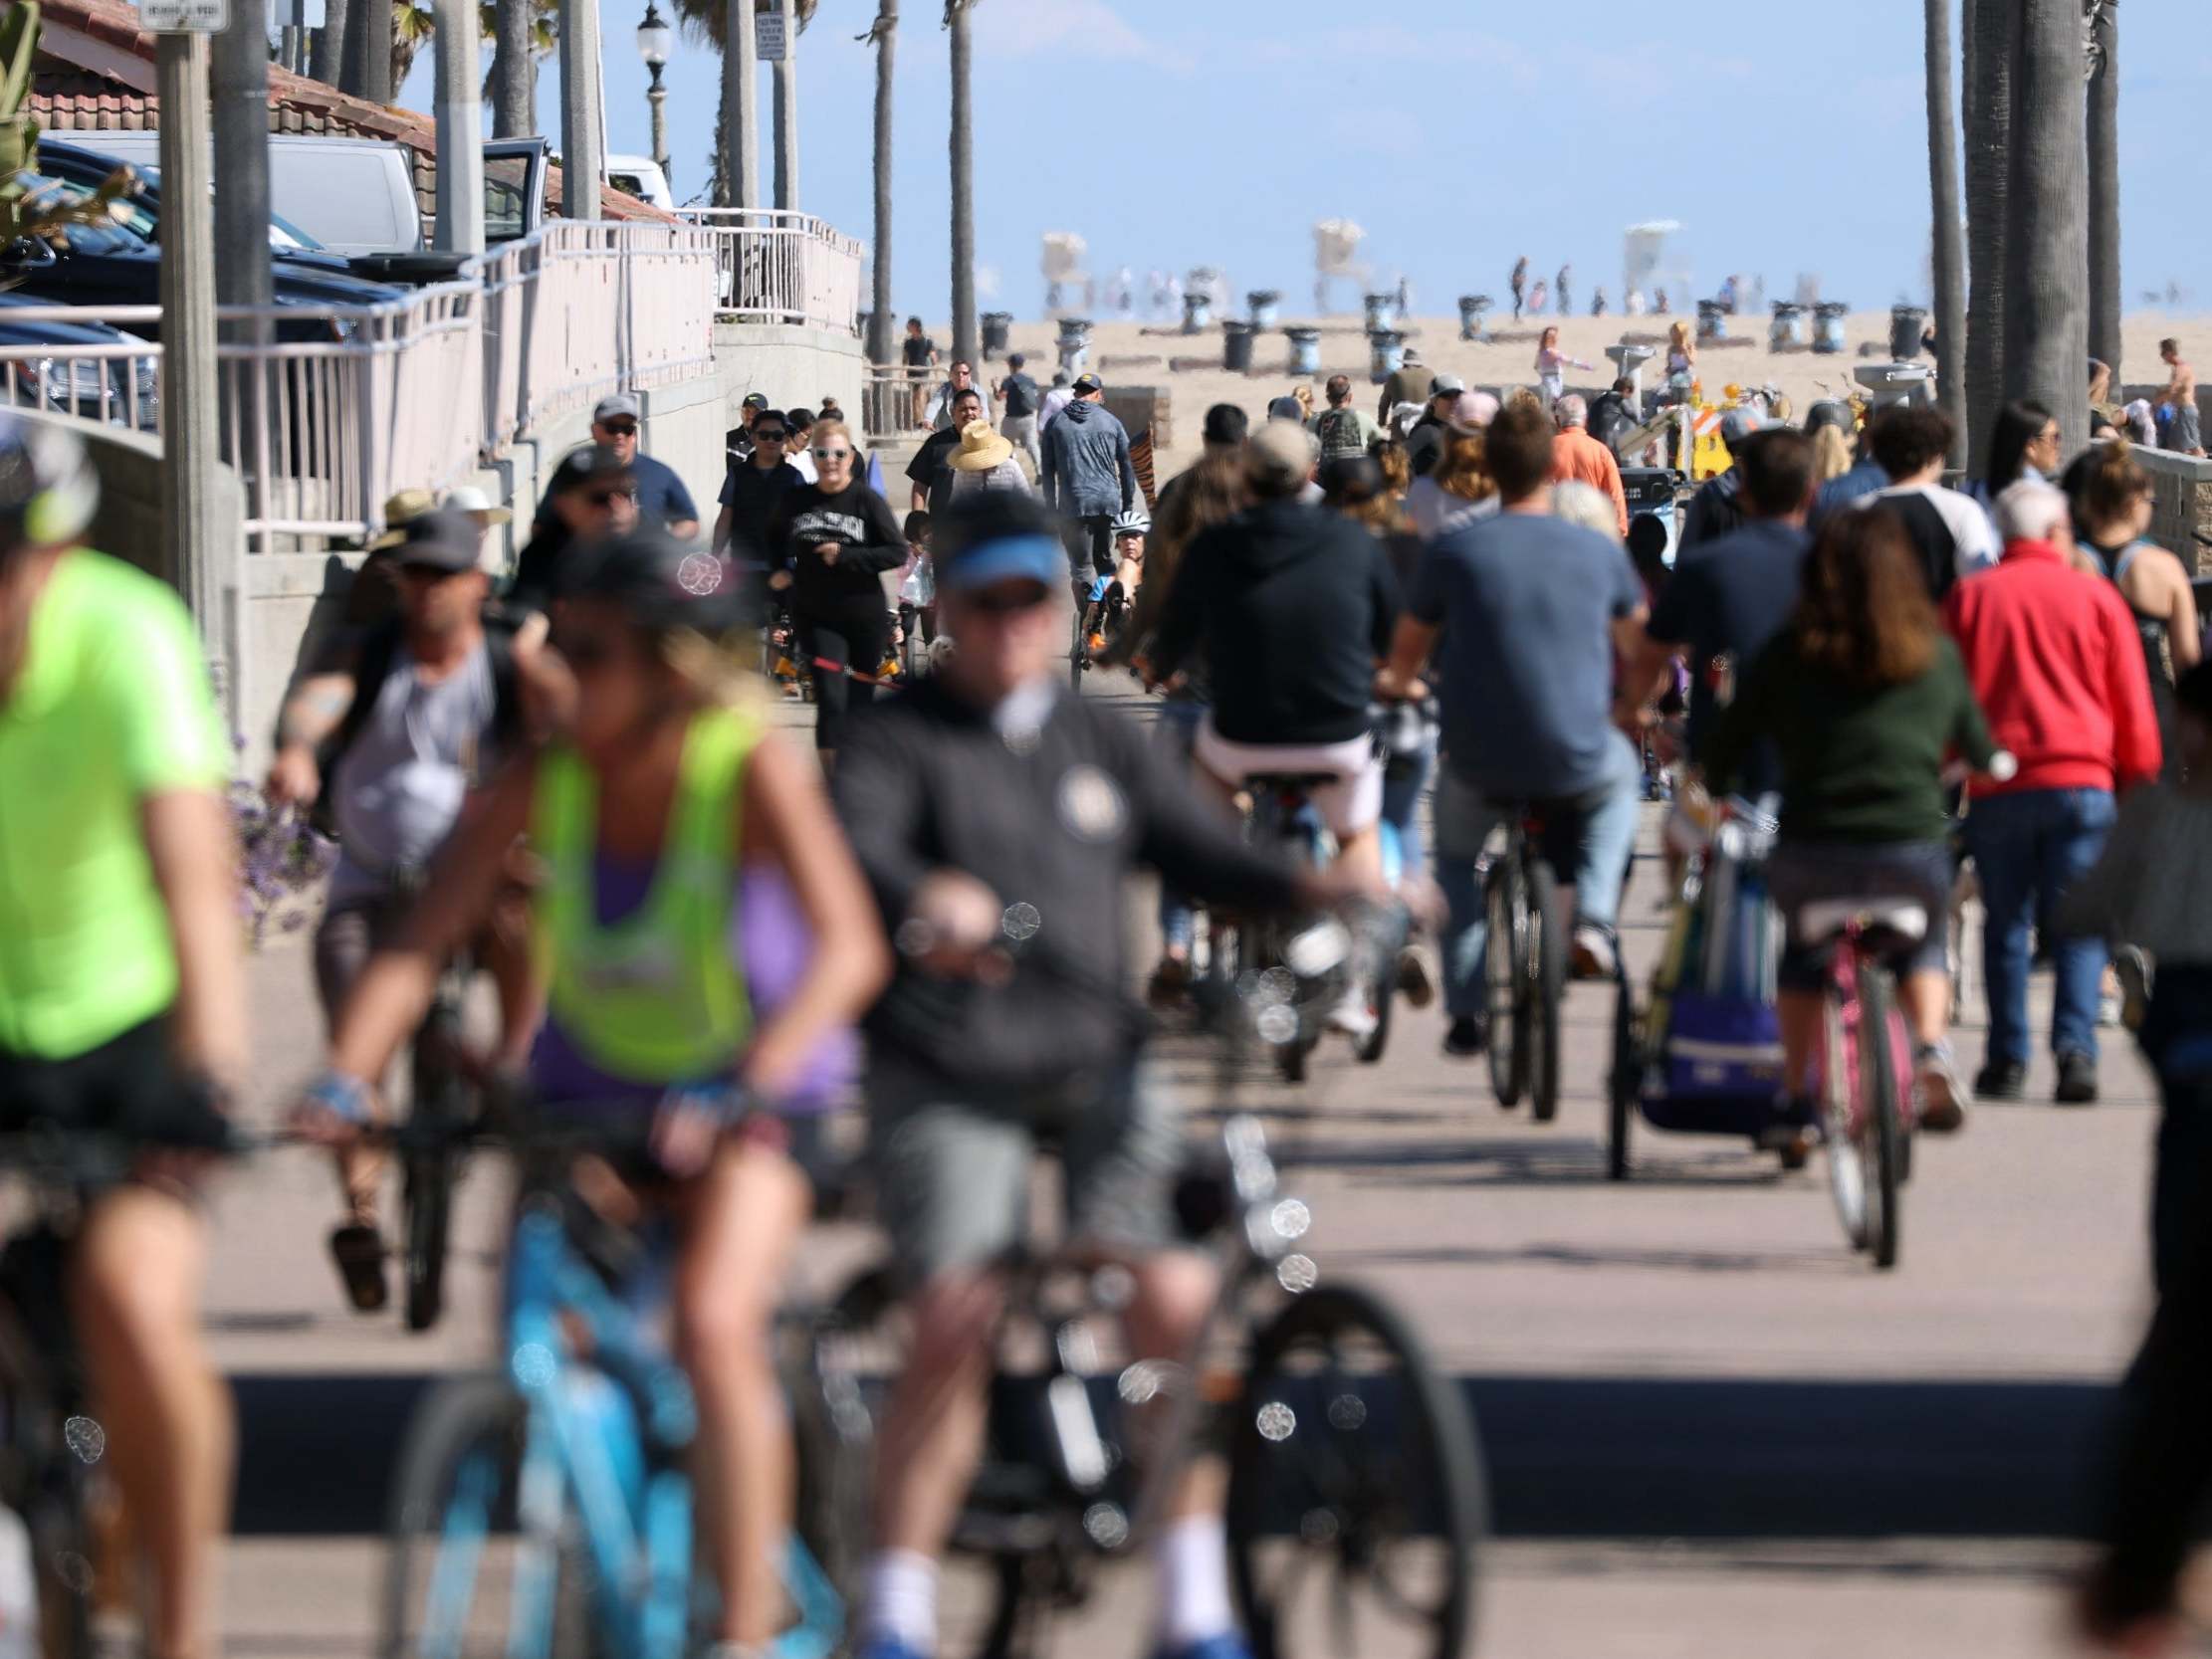 Crowds gathered at Huntington Beach, California, at the weekend despite an order to social distance